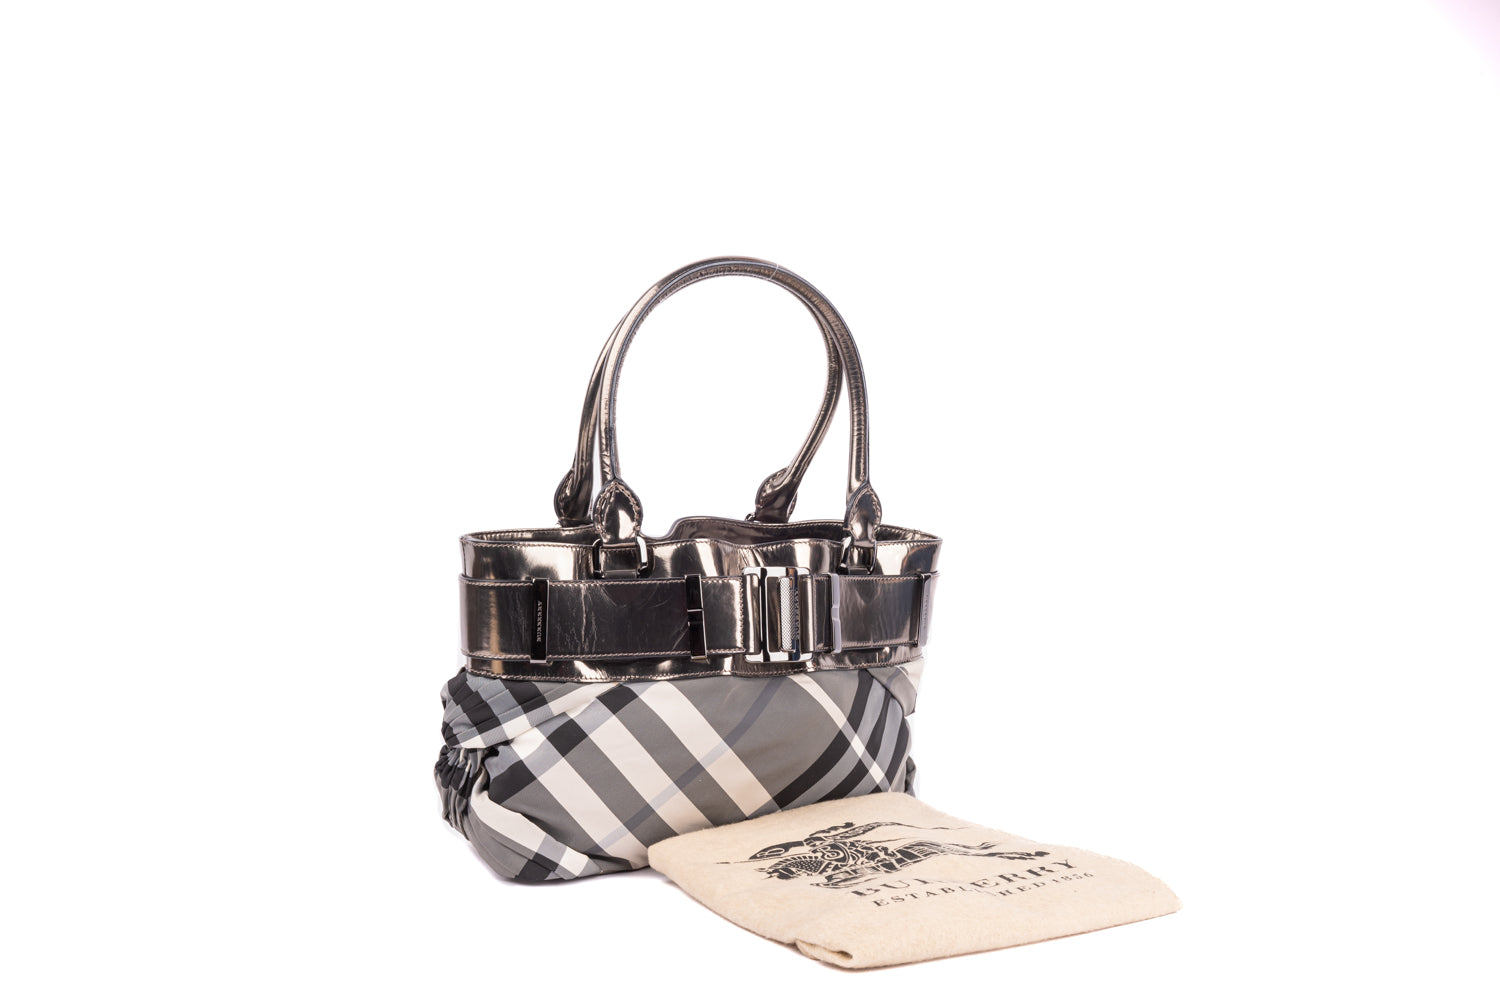 Burberry Beat Knotted Healy Metallic Bag